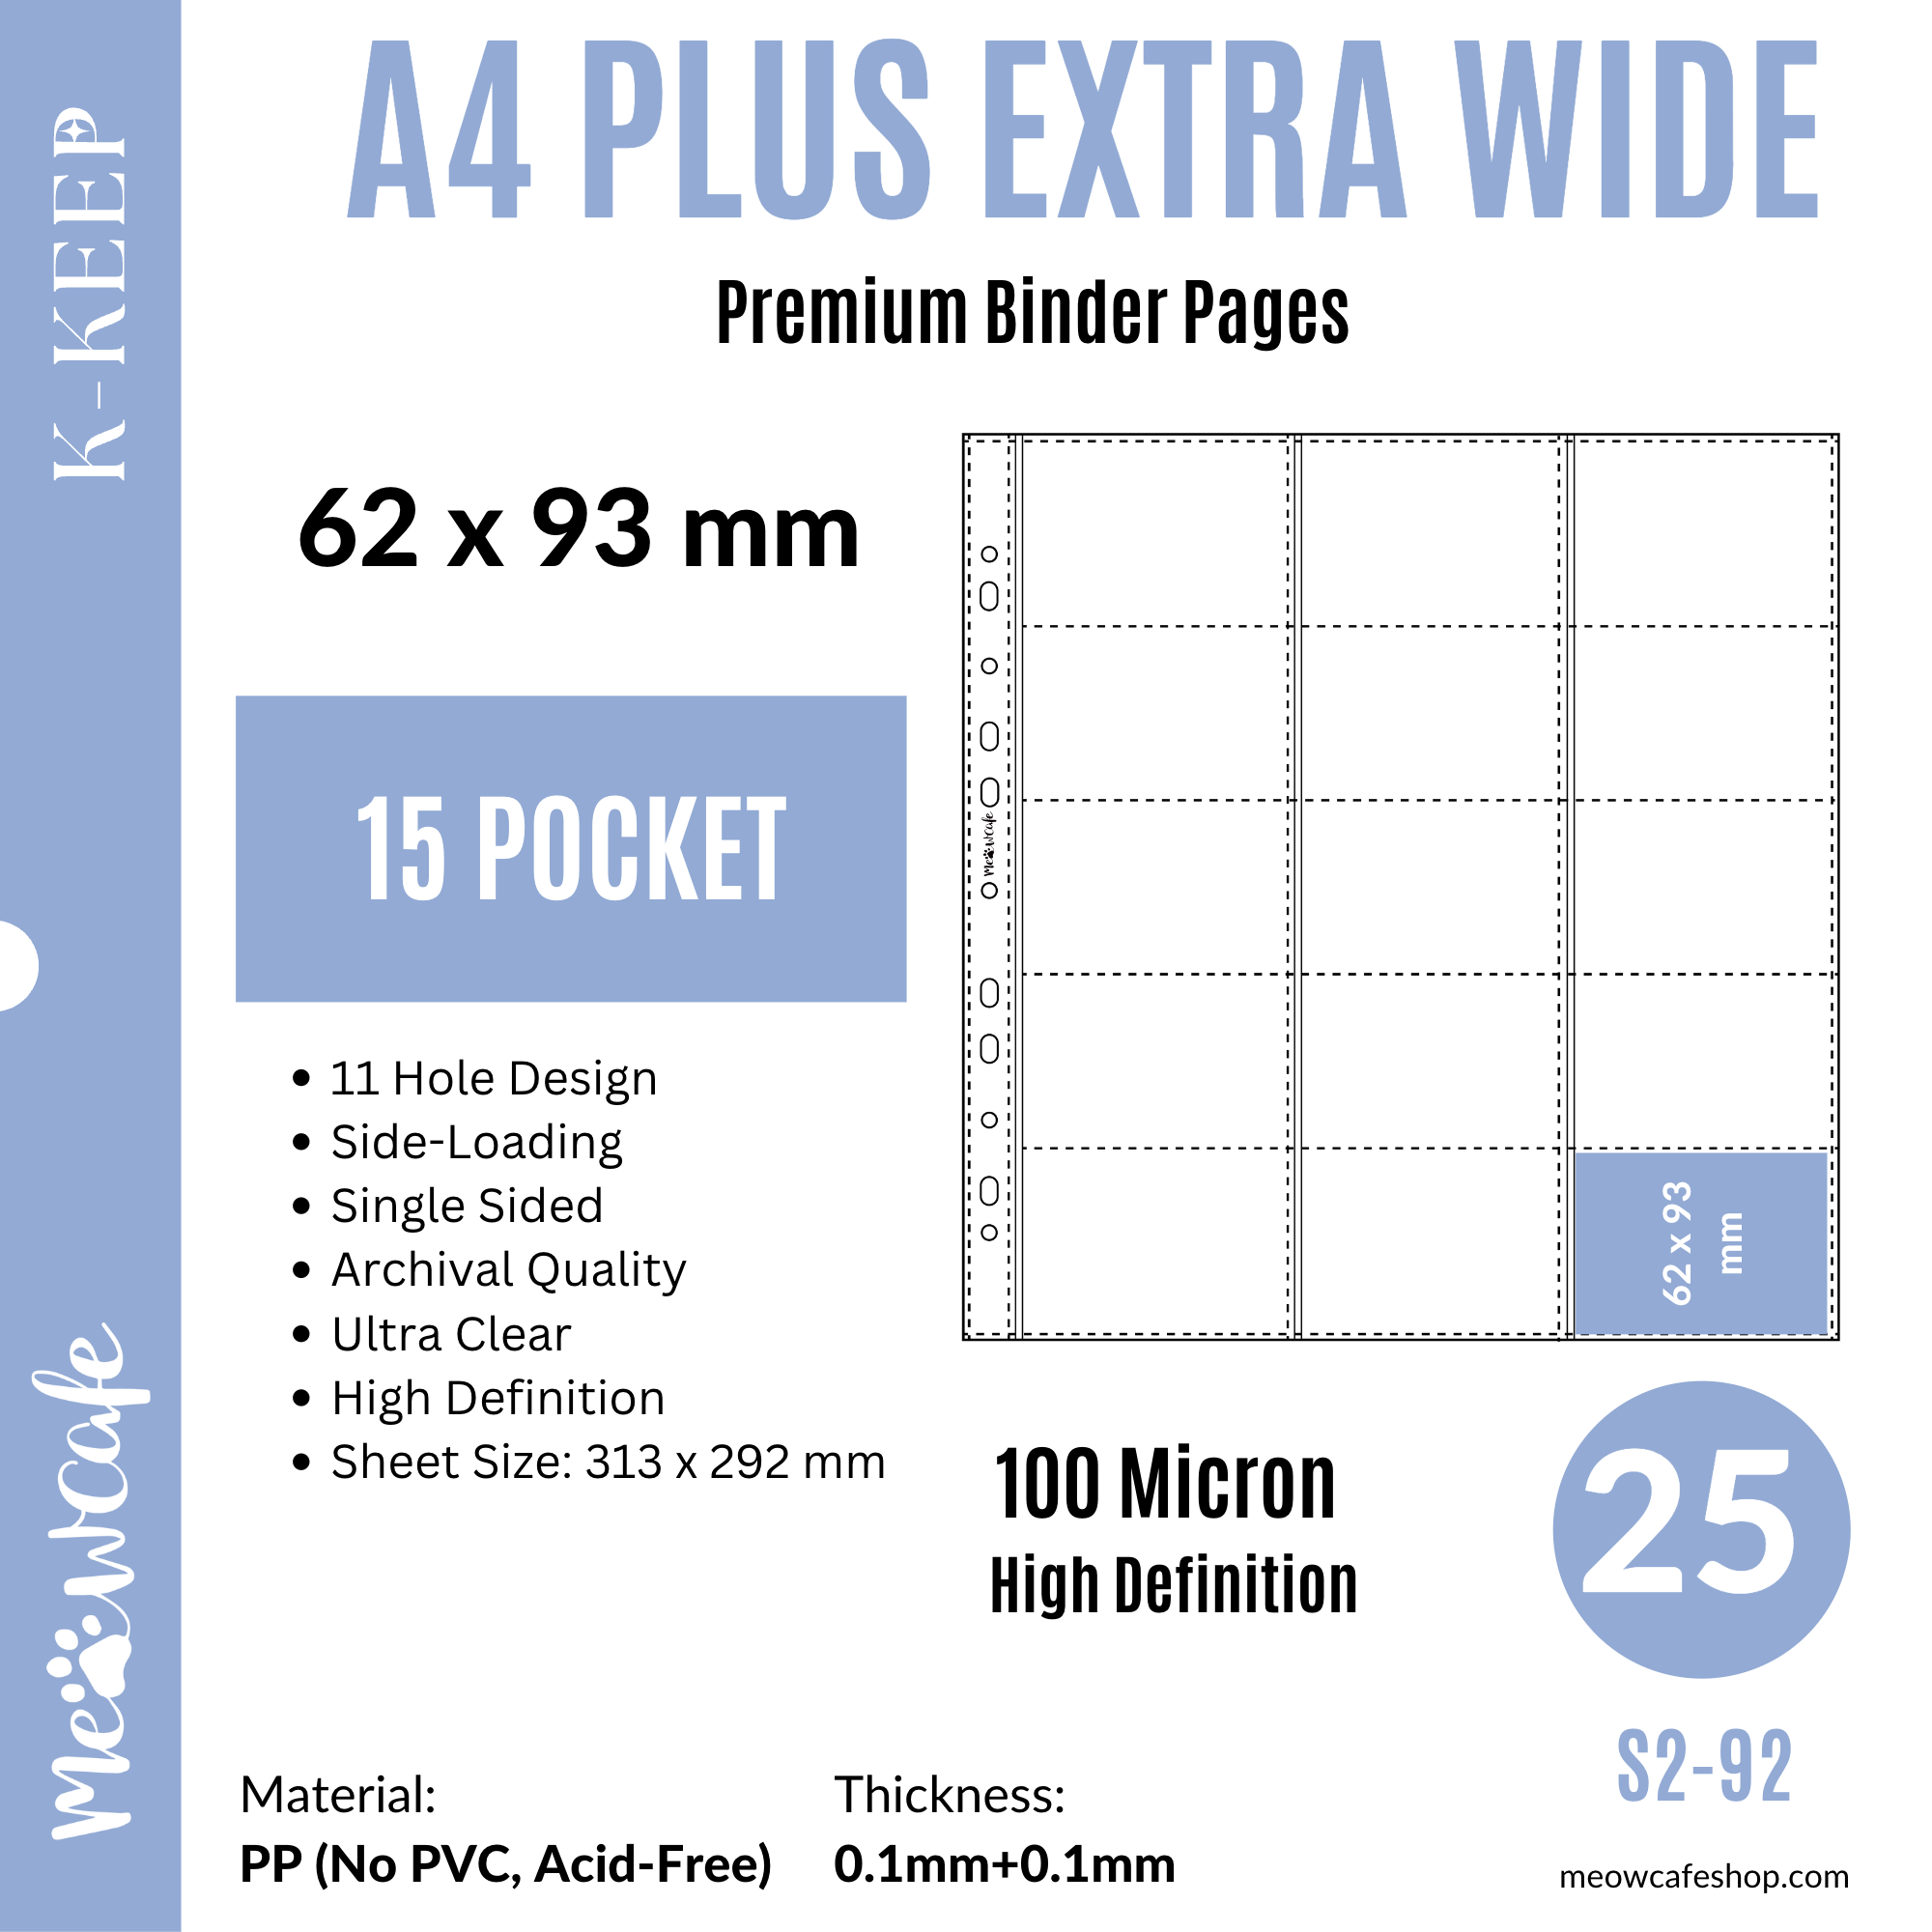 K-KEEP [A4 PLUS Extra Wide] - 15 Pocket (62x93mm) - 11 Holes Premium Binder Pages, 100 Micron Thick, High Definition (Pack of 25) - (S2-92))